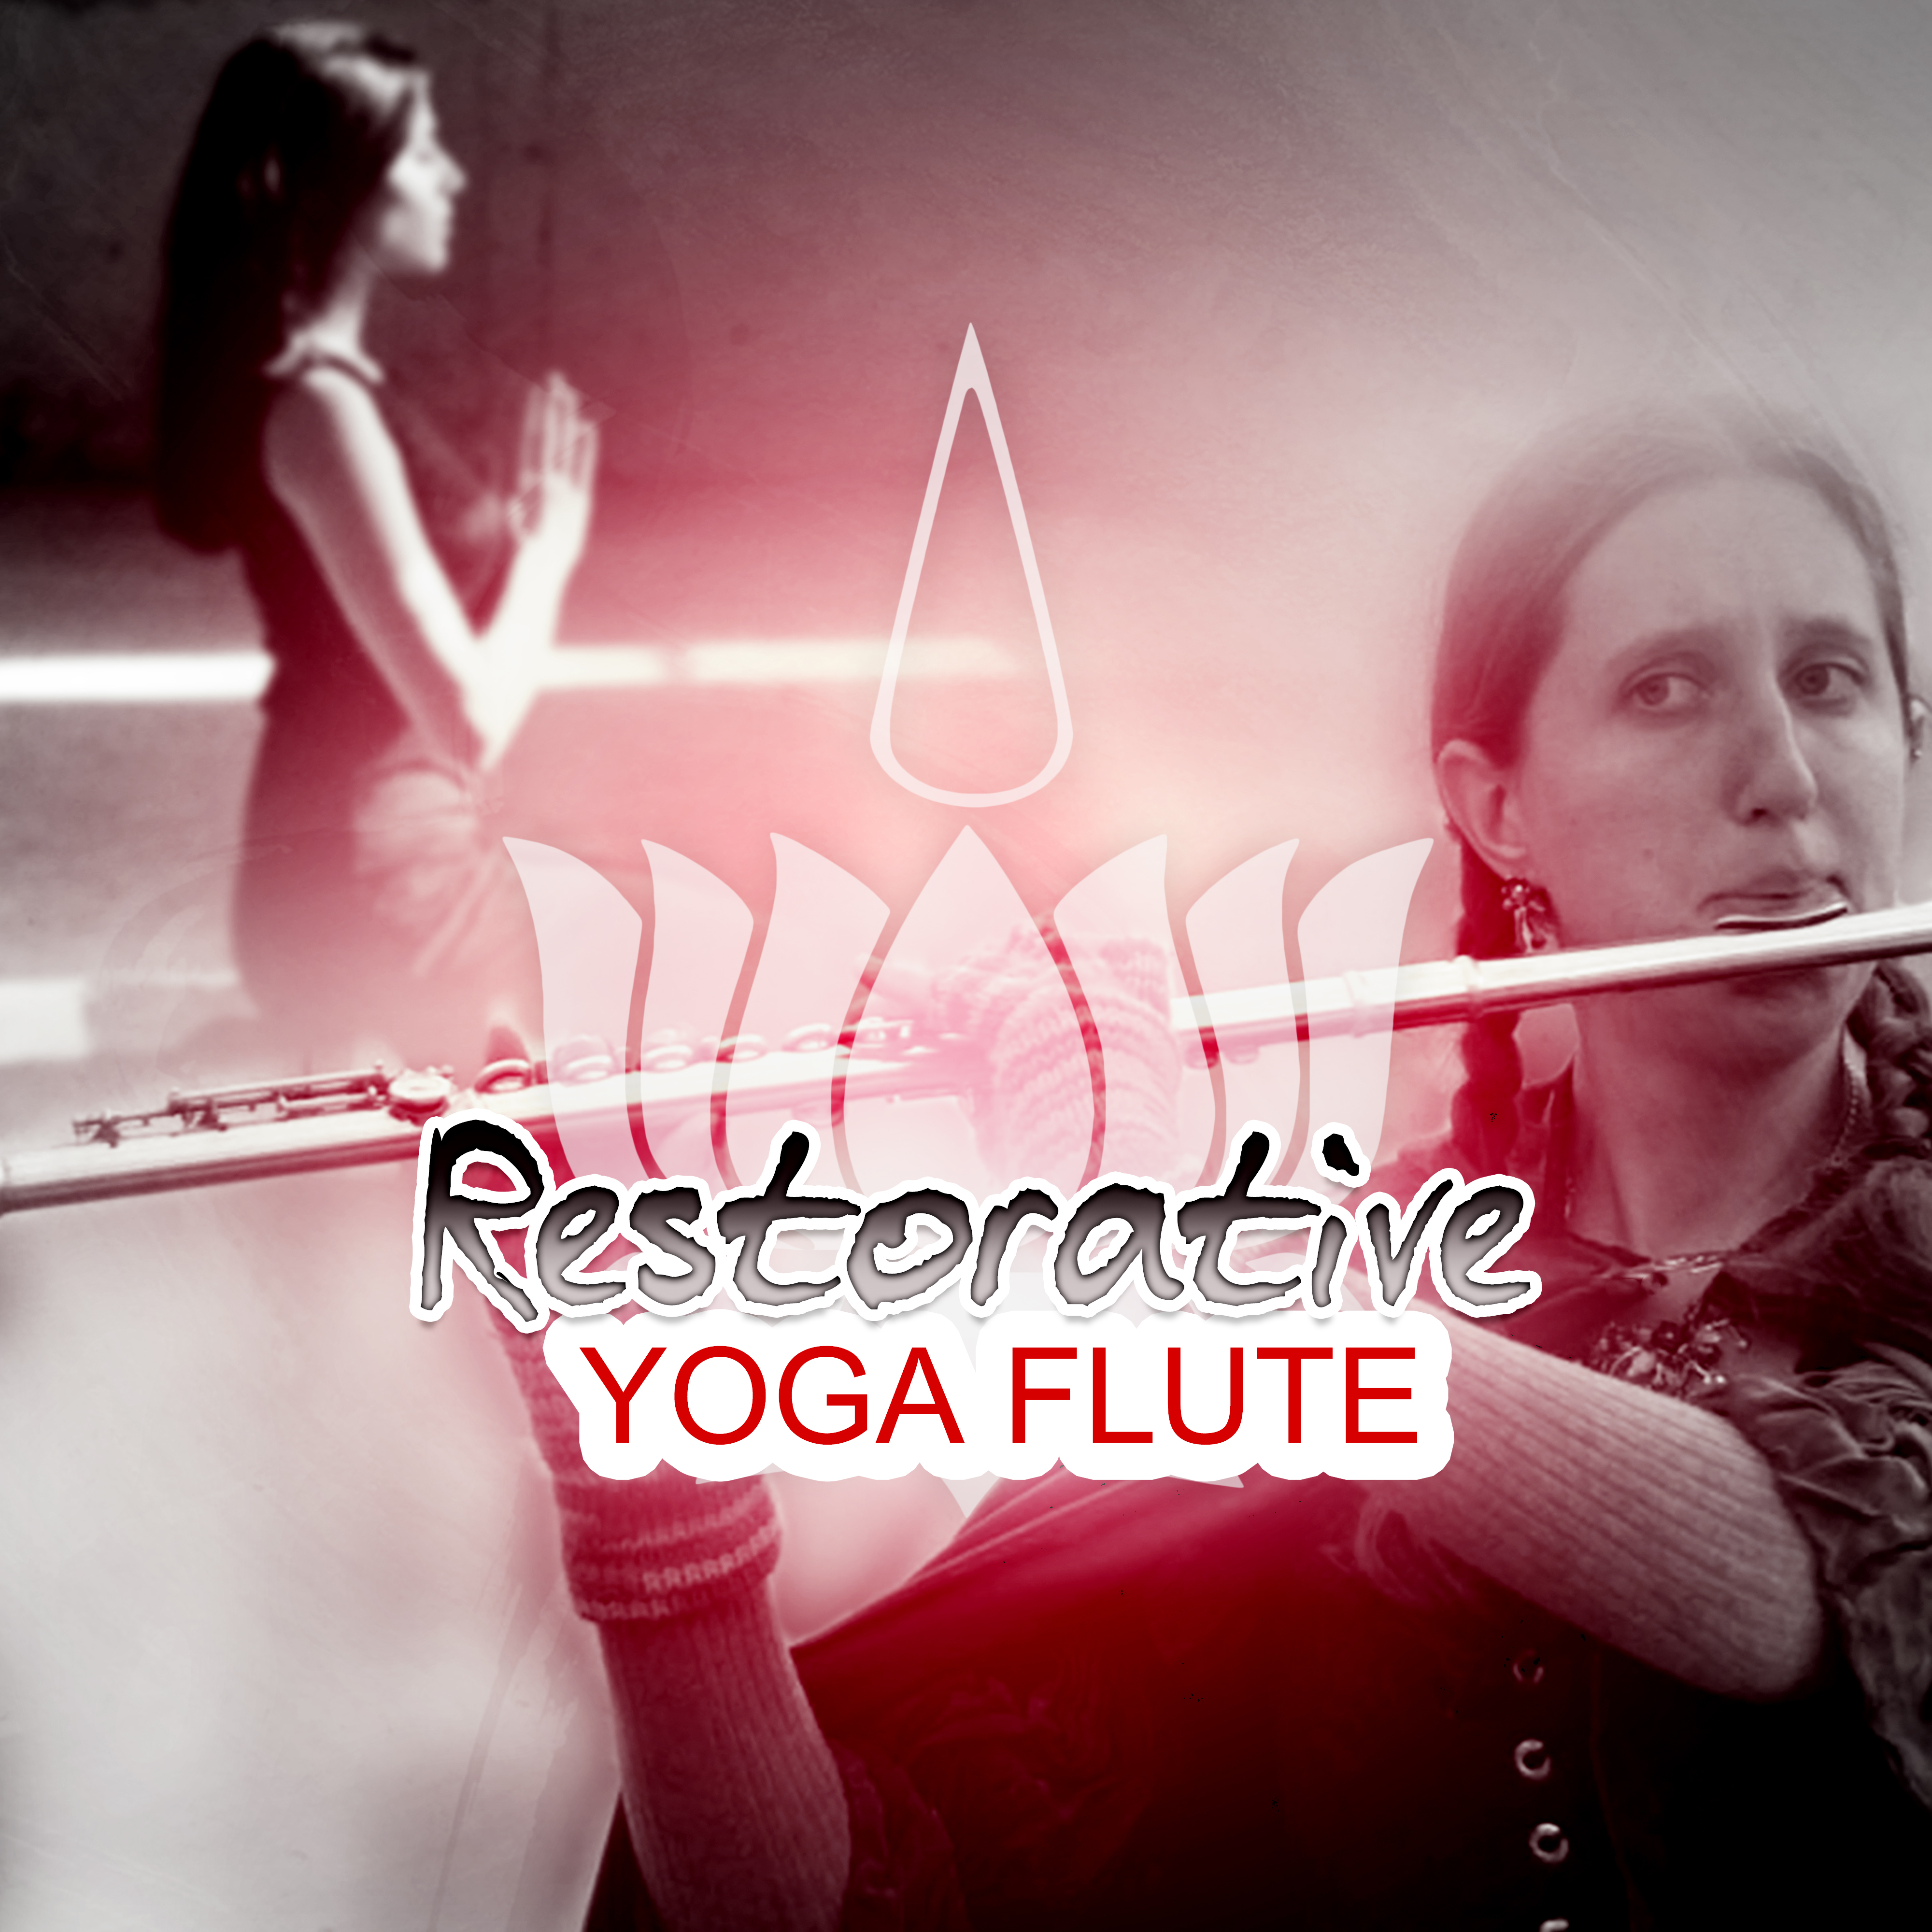 Restorative Yoga Flute  New Age Music to Renew and Relax, Meditation, Relaxation, Sleep Therapy, Spa, Massage, Reiki